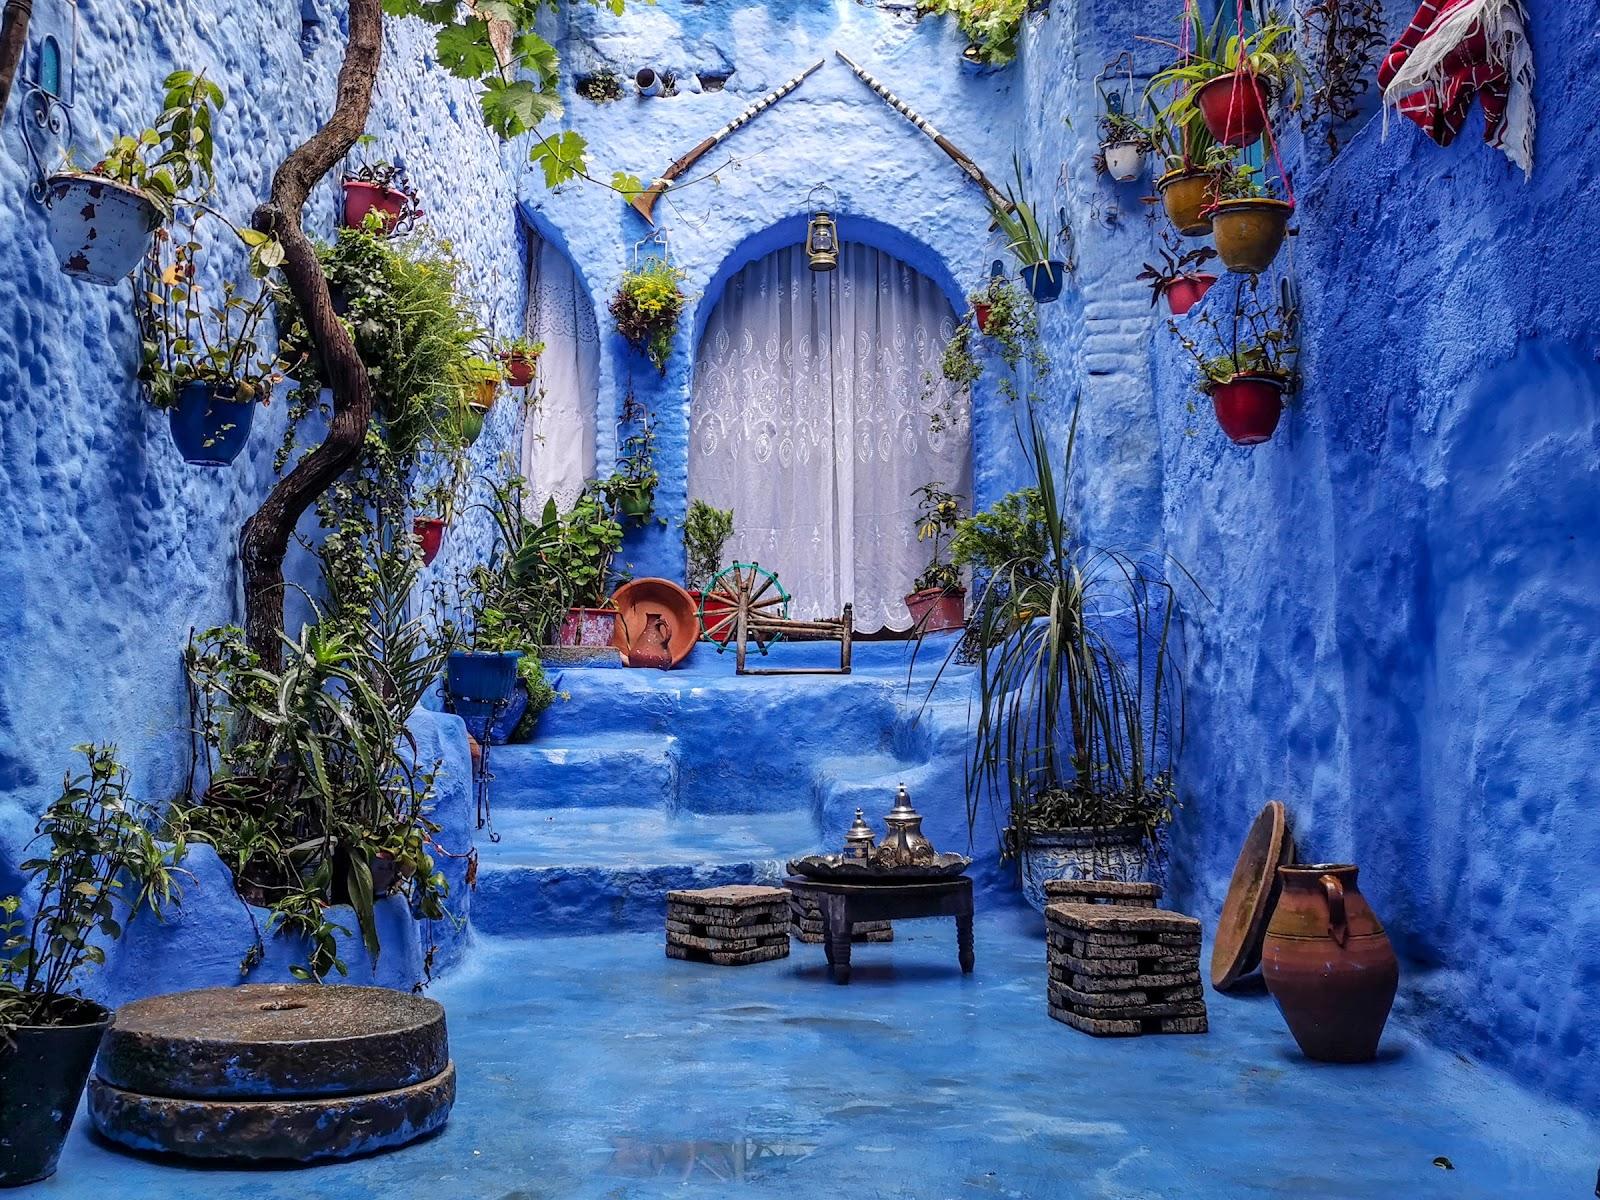 A small blue painted courtyard in the blue city with pot plants on the walls.